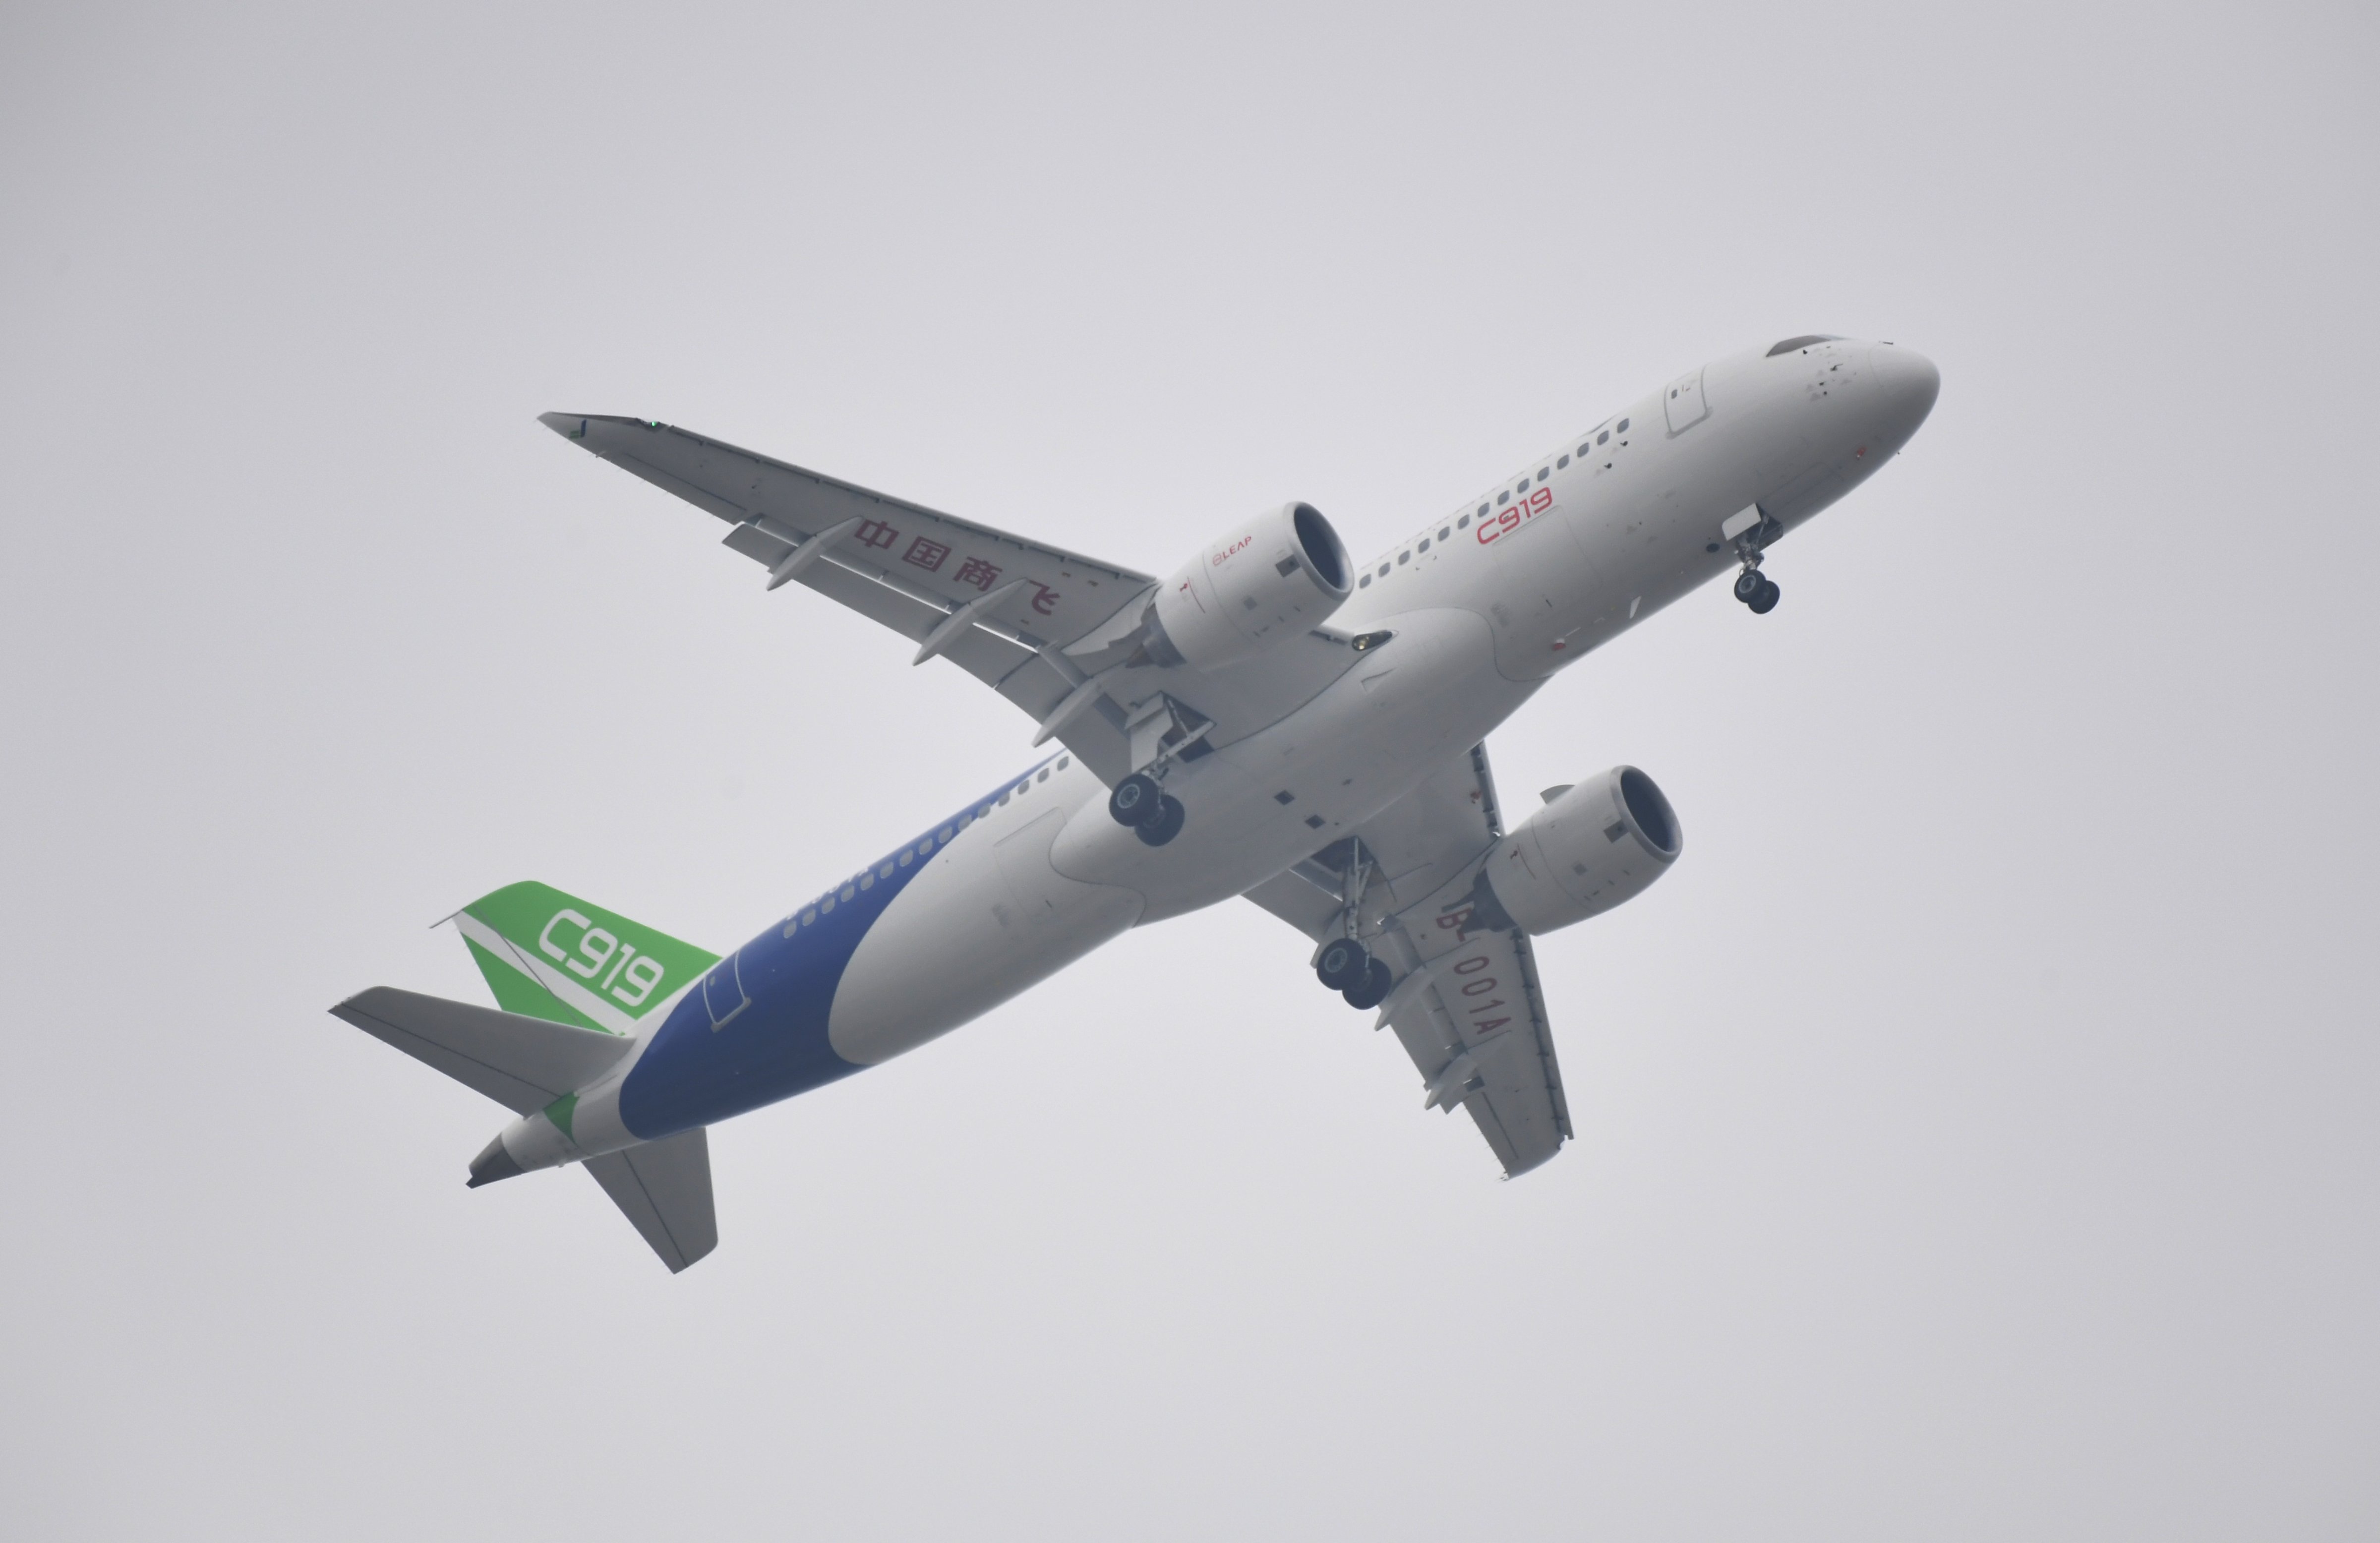 China's home-grown C919 passenger jet takes off from Pudong International Airport in Shanghai on May 5, 2017. (Greg Baker—AFP/Getty Images)